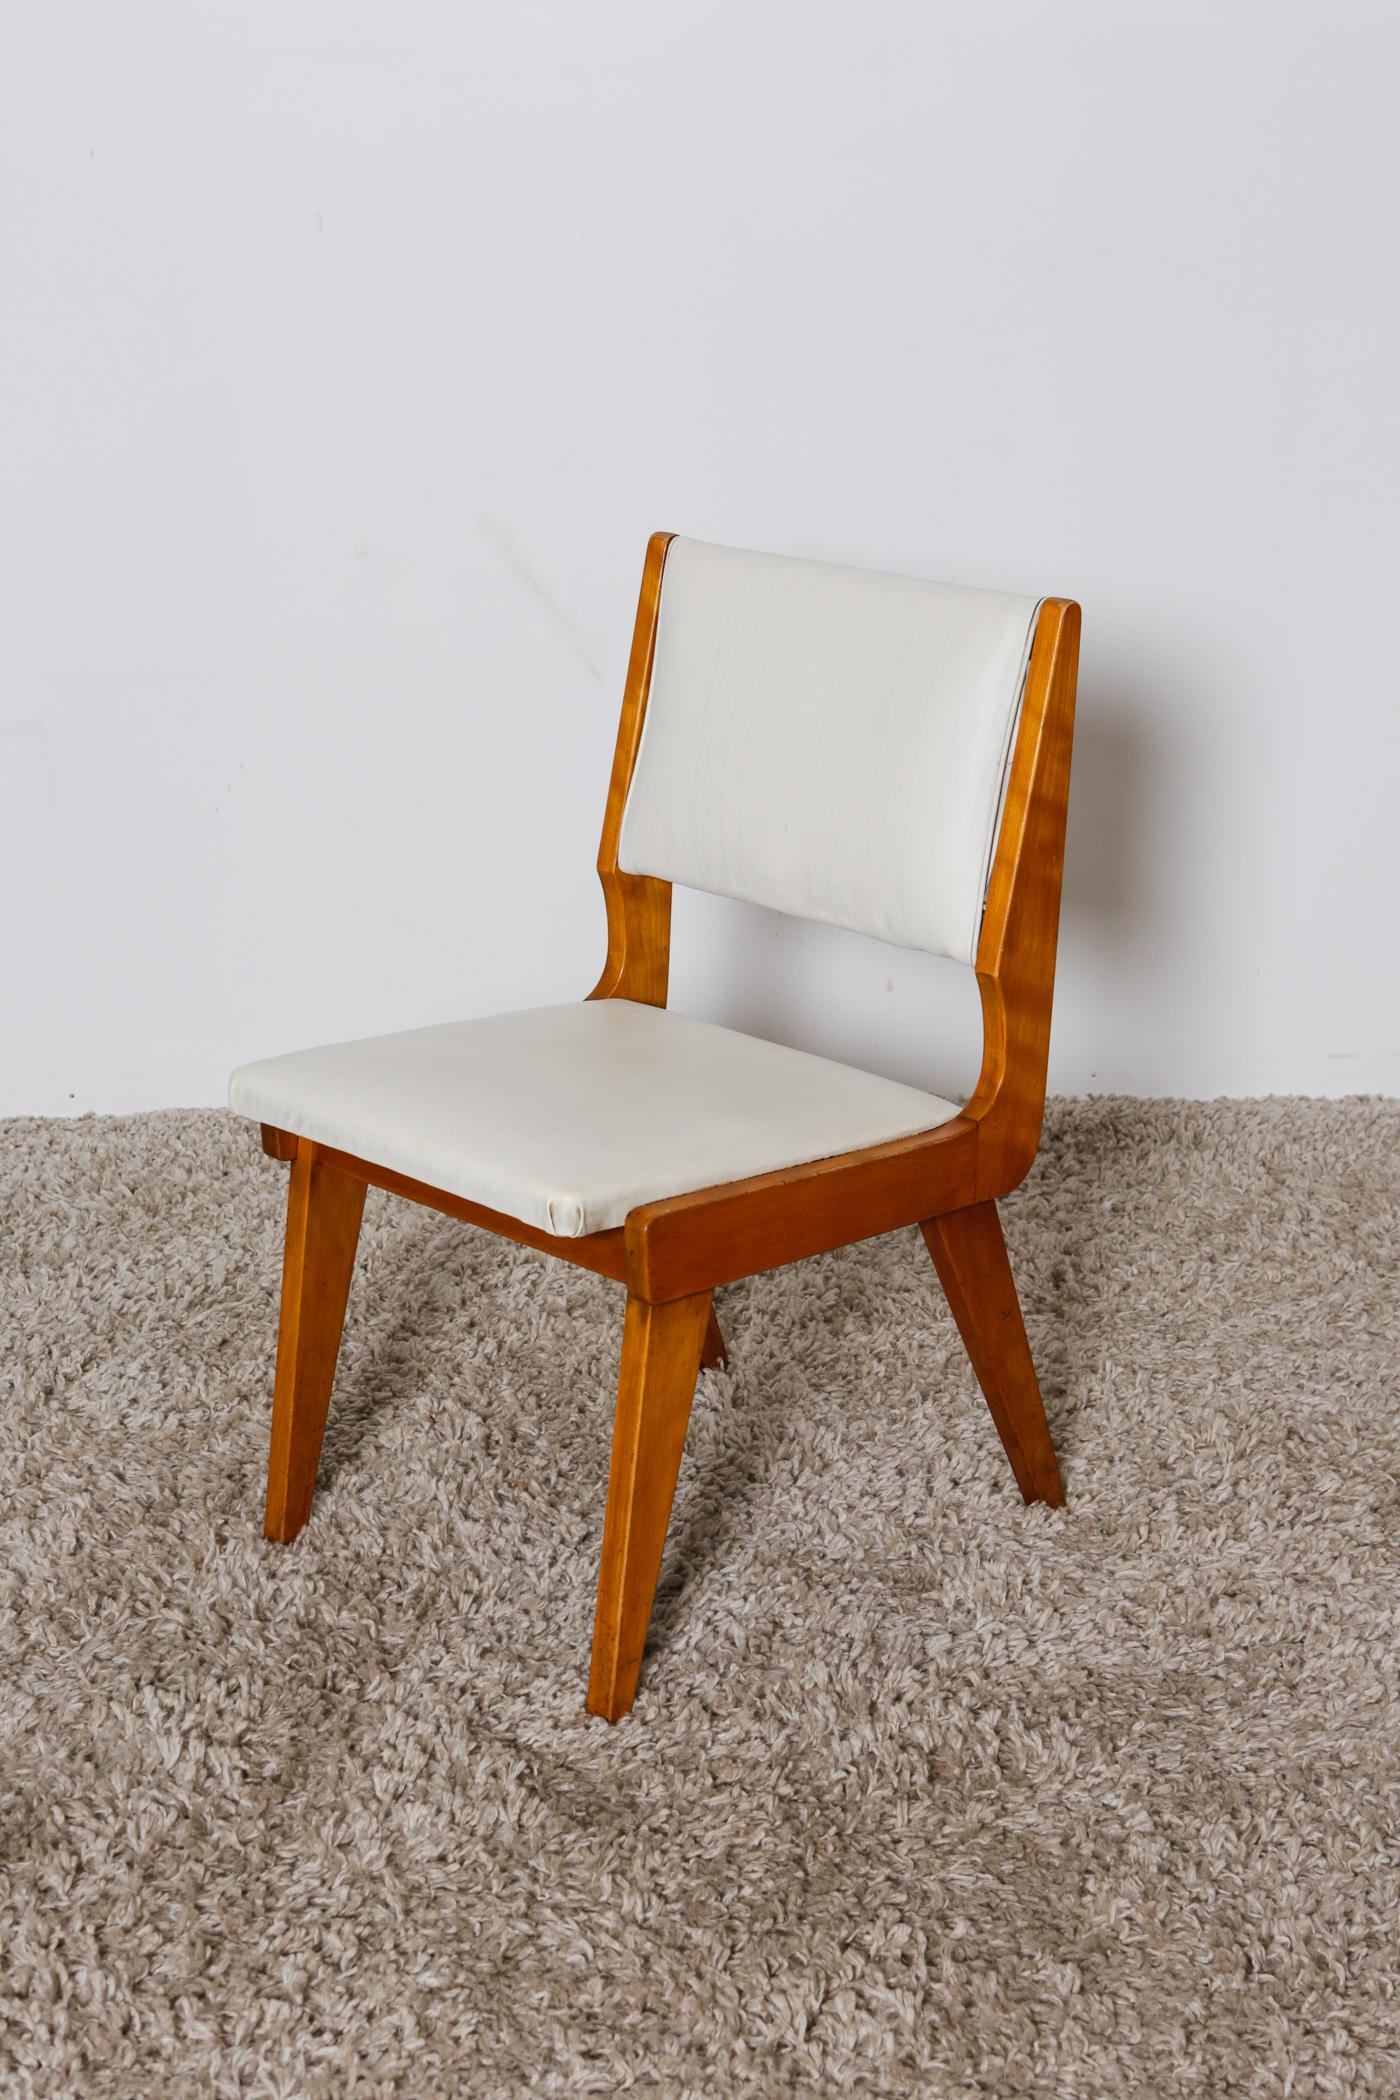 1960s Mid-Century Modern Maple Wood Dining Chairs #5976 by Feldman Brothers For Sale 2